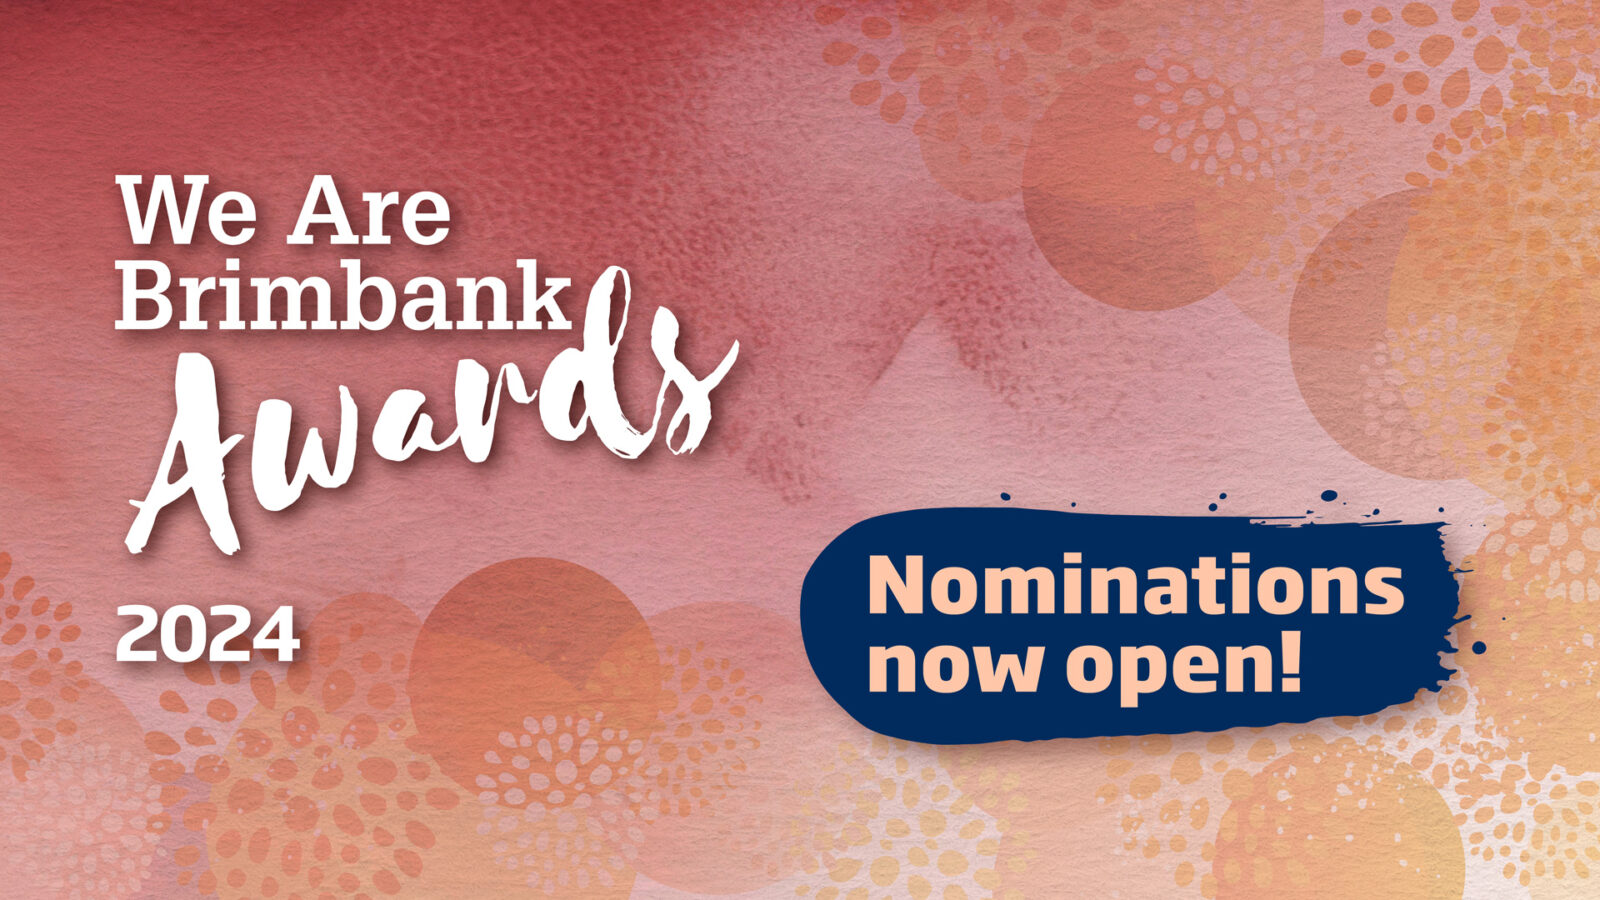 Nominations are open for the We Are Brimbank Awards until Sunday 7 April 2024.